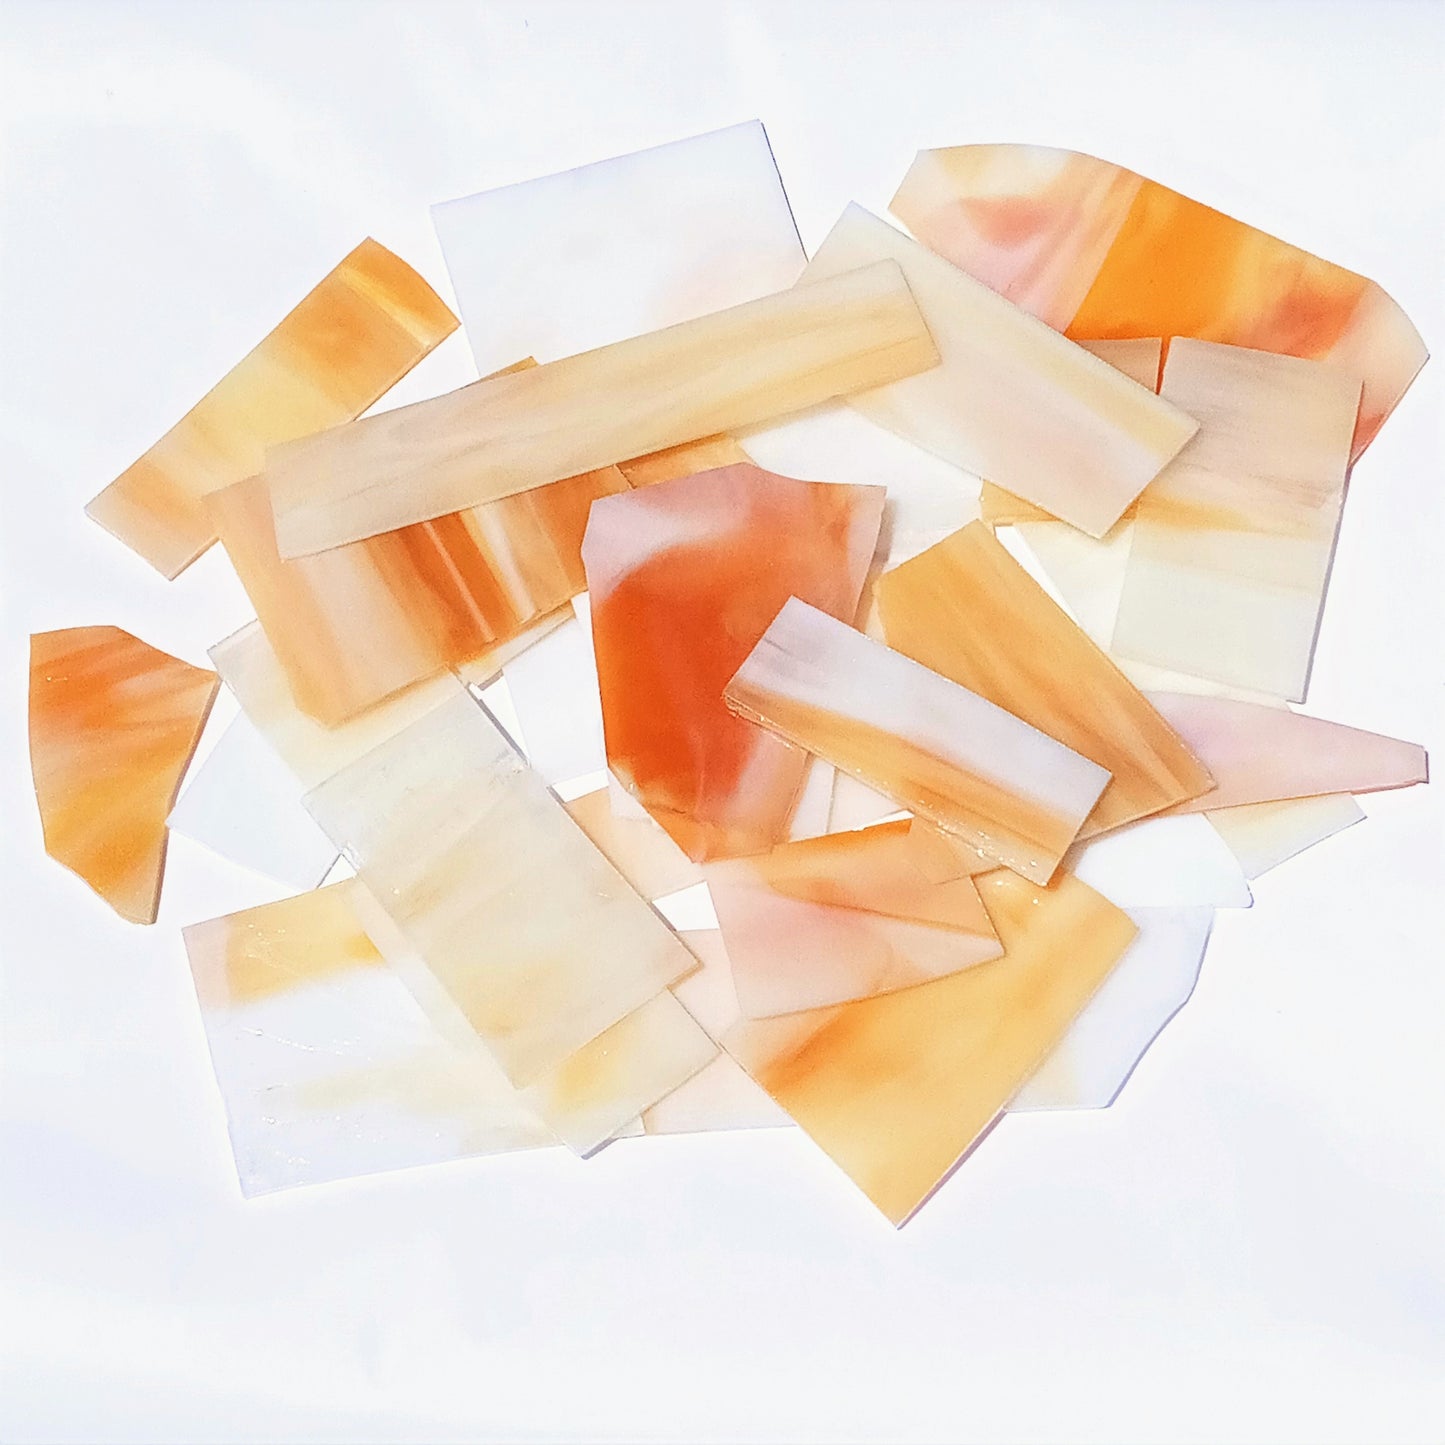 Amber Opal White Stained Glass Scraps, Curated 1 Lb of Reclaimed Shop Scrap Glass in Shades of Amber Opal